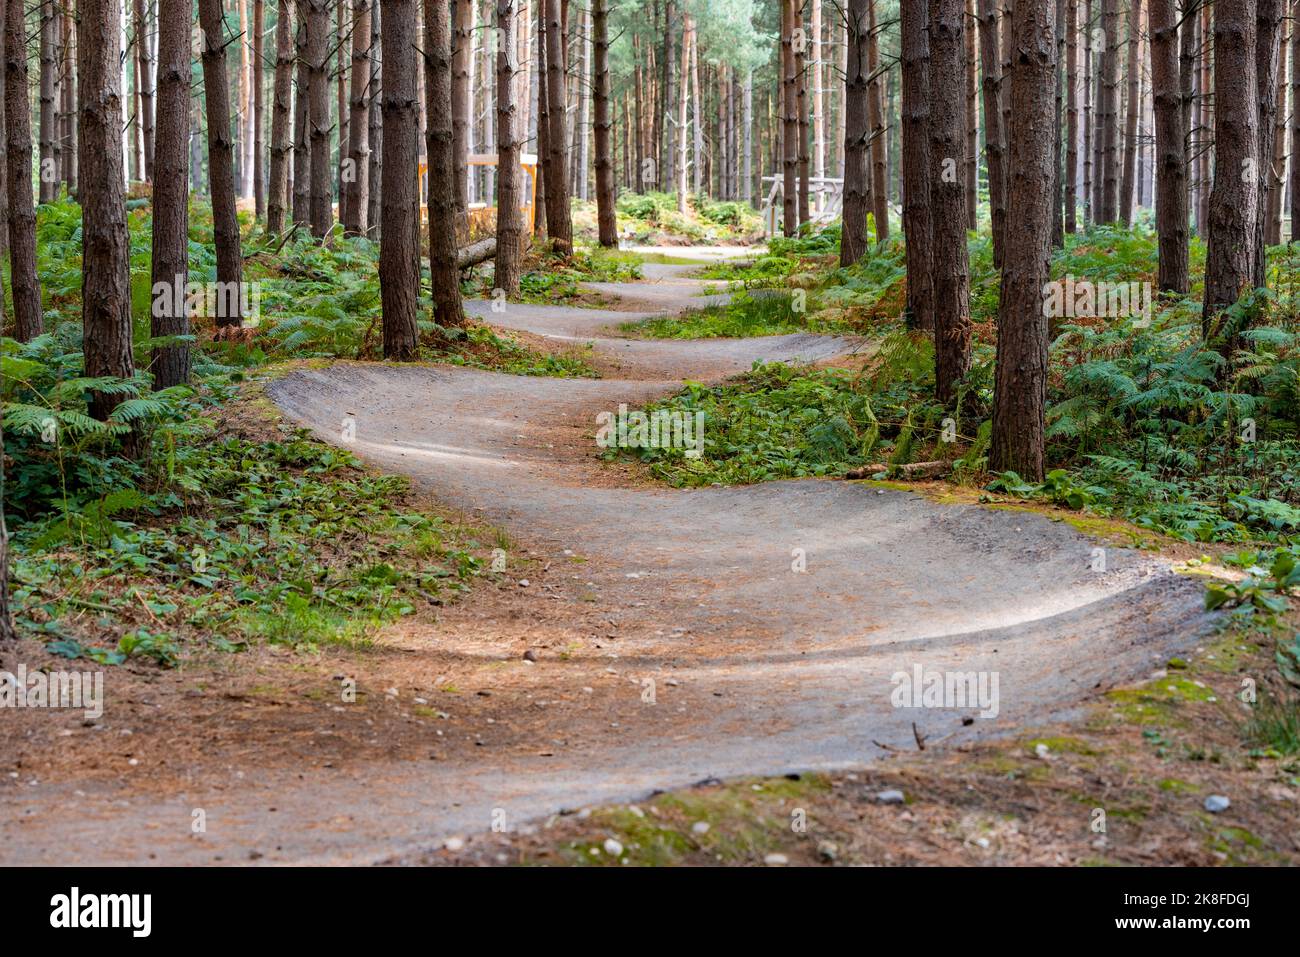 UK, England, Winding forest footpath in Cannock Chase Stock Photo